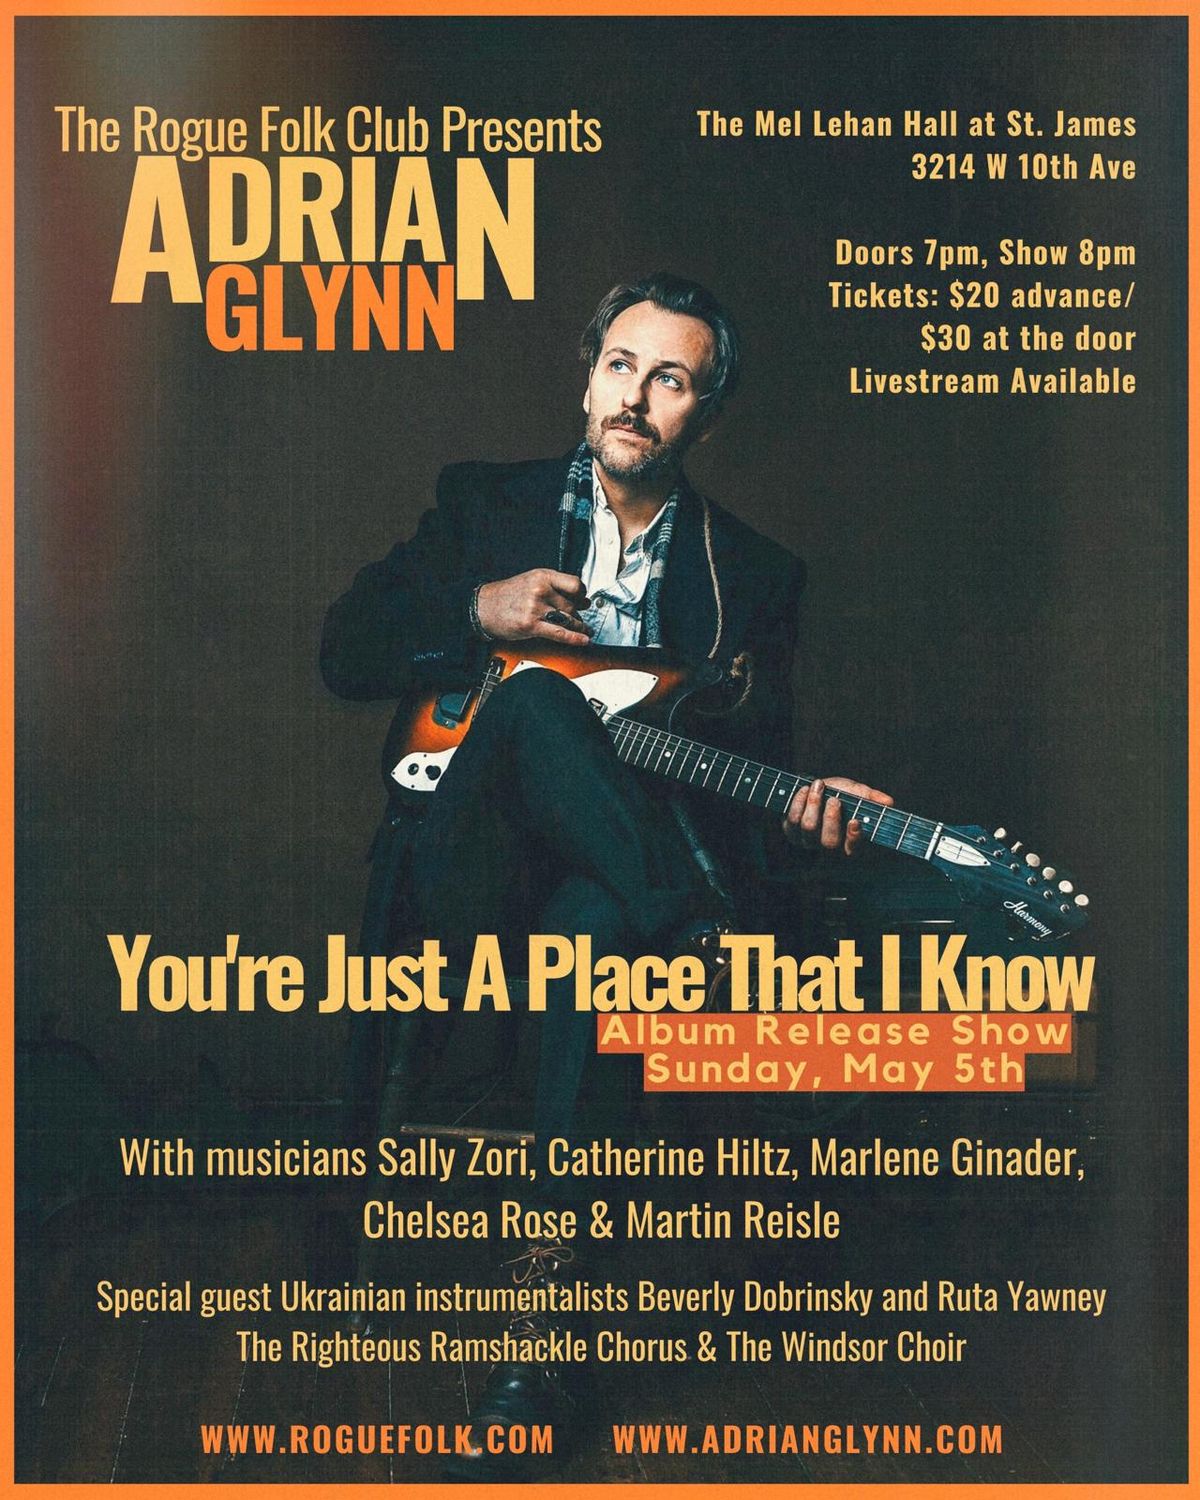 Adrian Glynn ~ Album Release Concert (Live and Streaming)